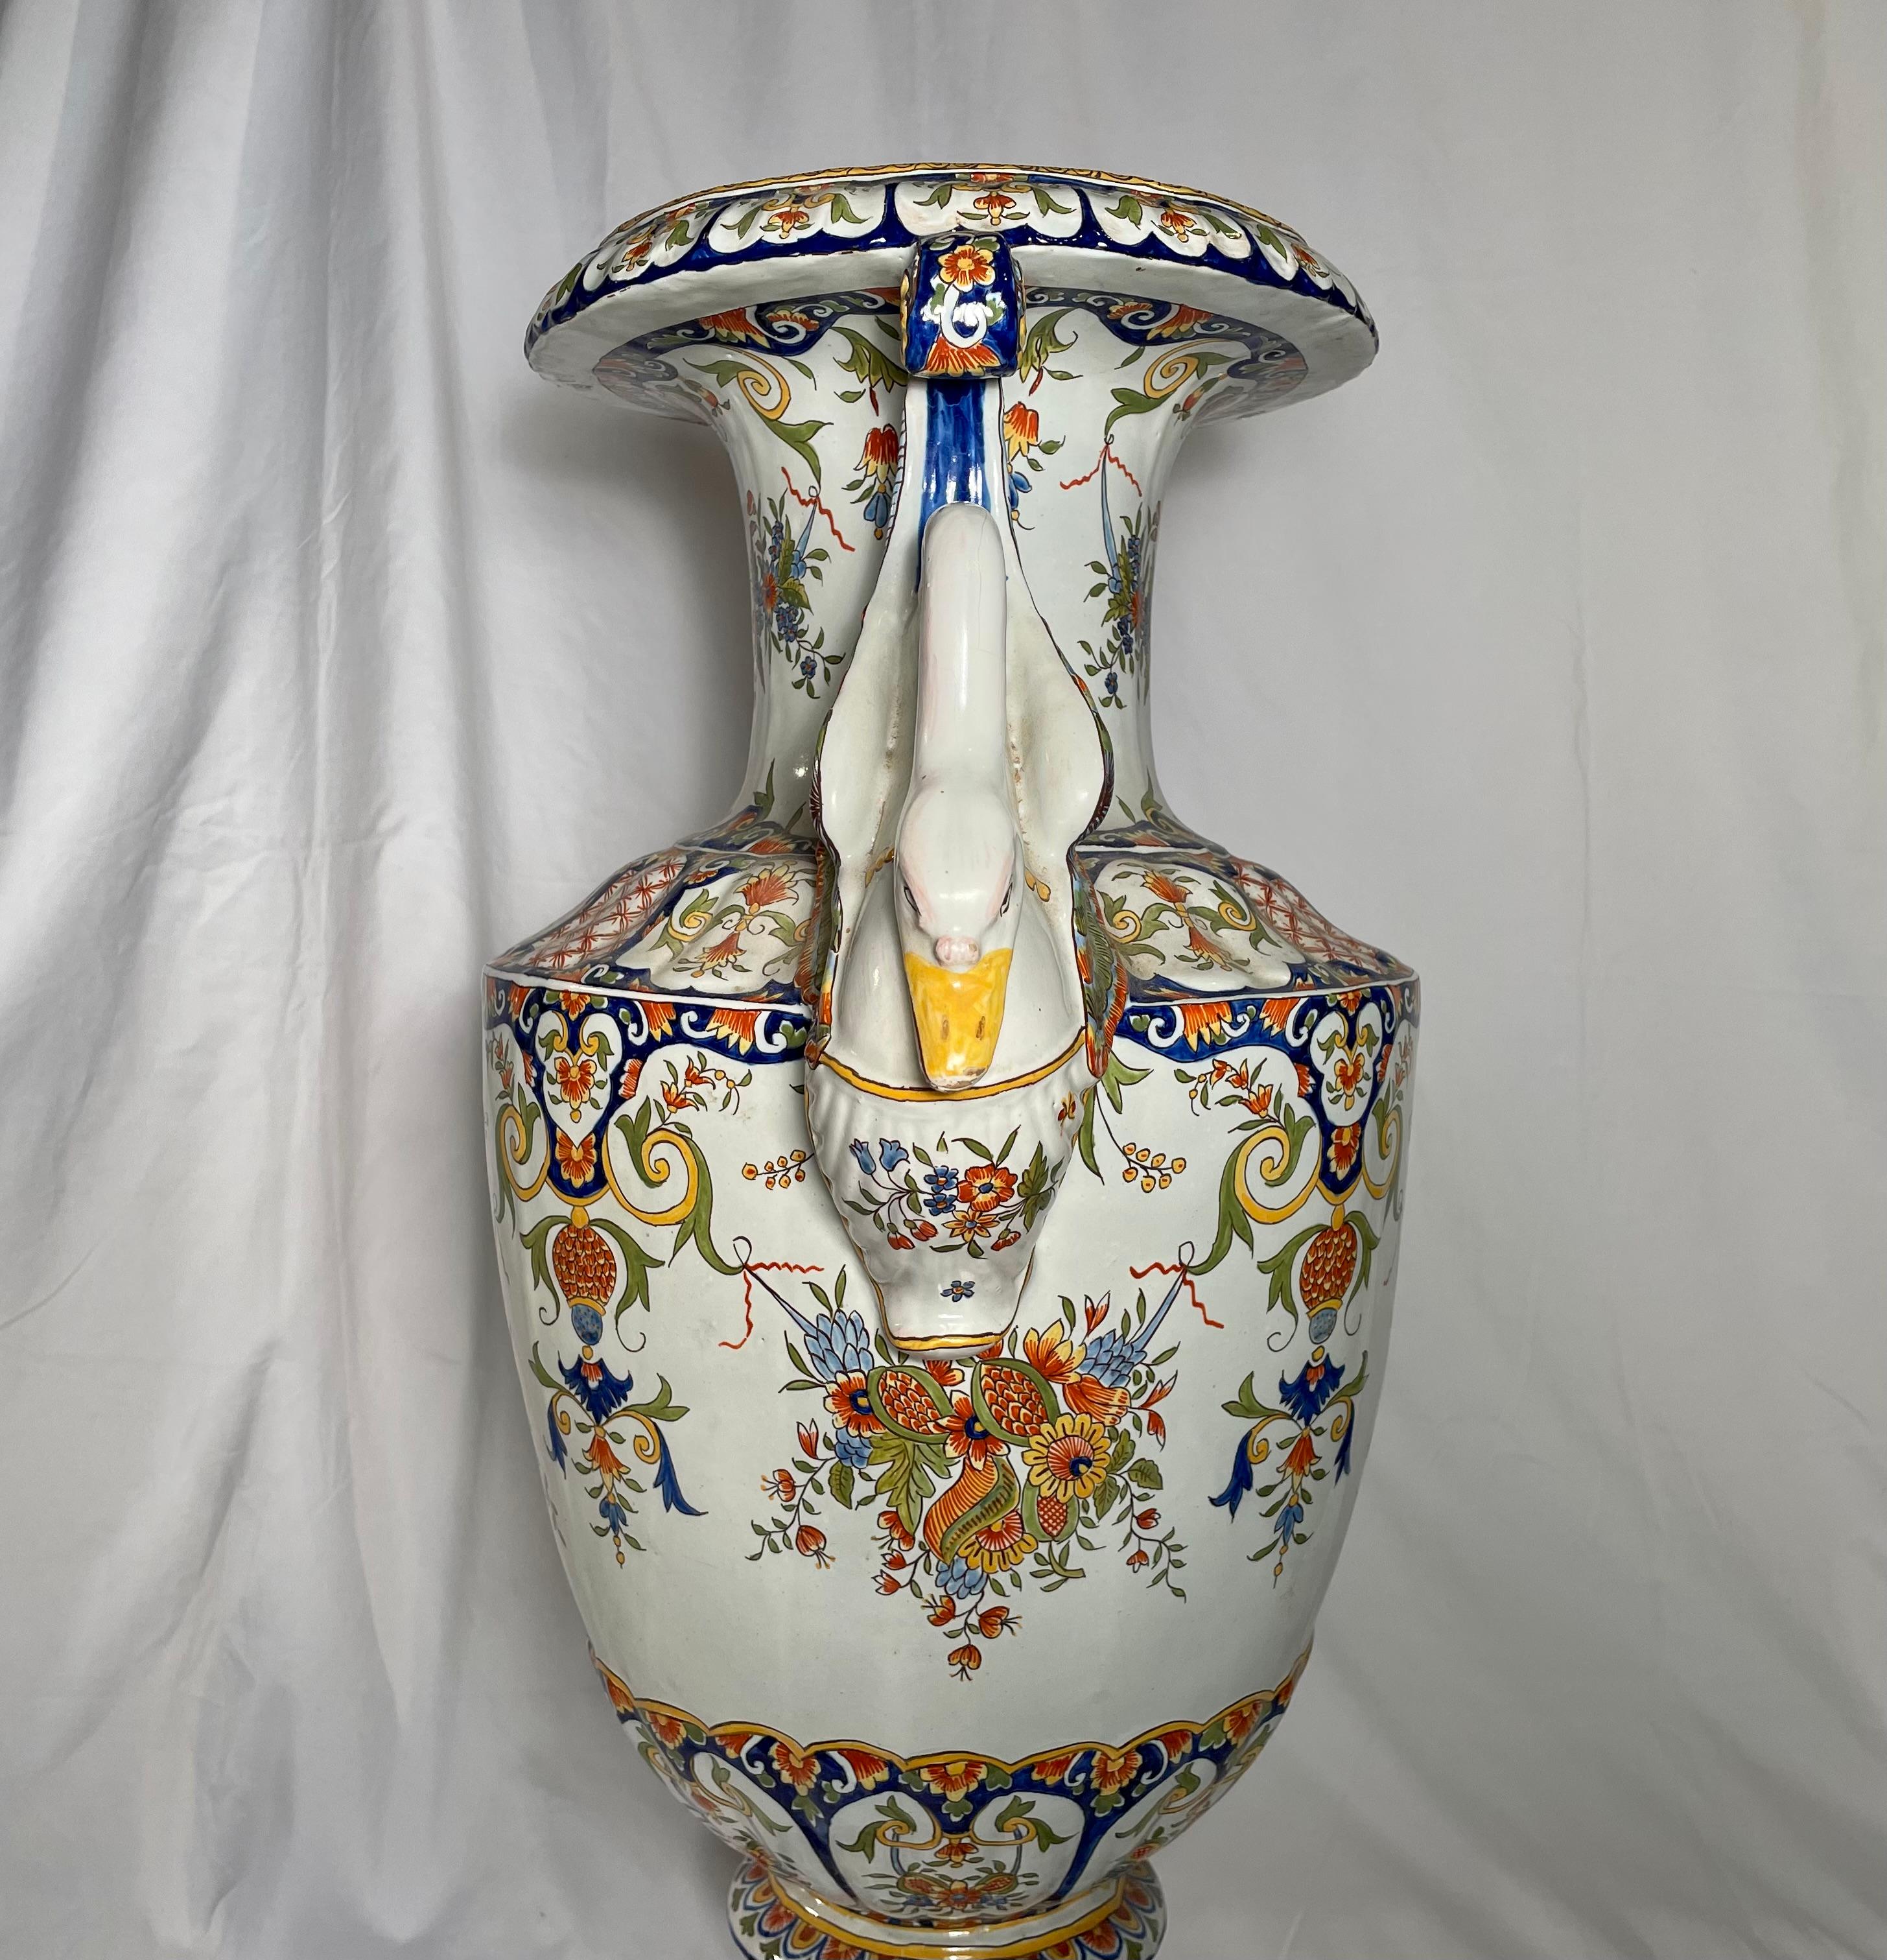 Antique French Faience Enameled Urn, circa 1900-1910.